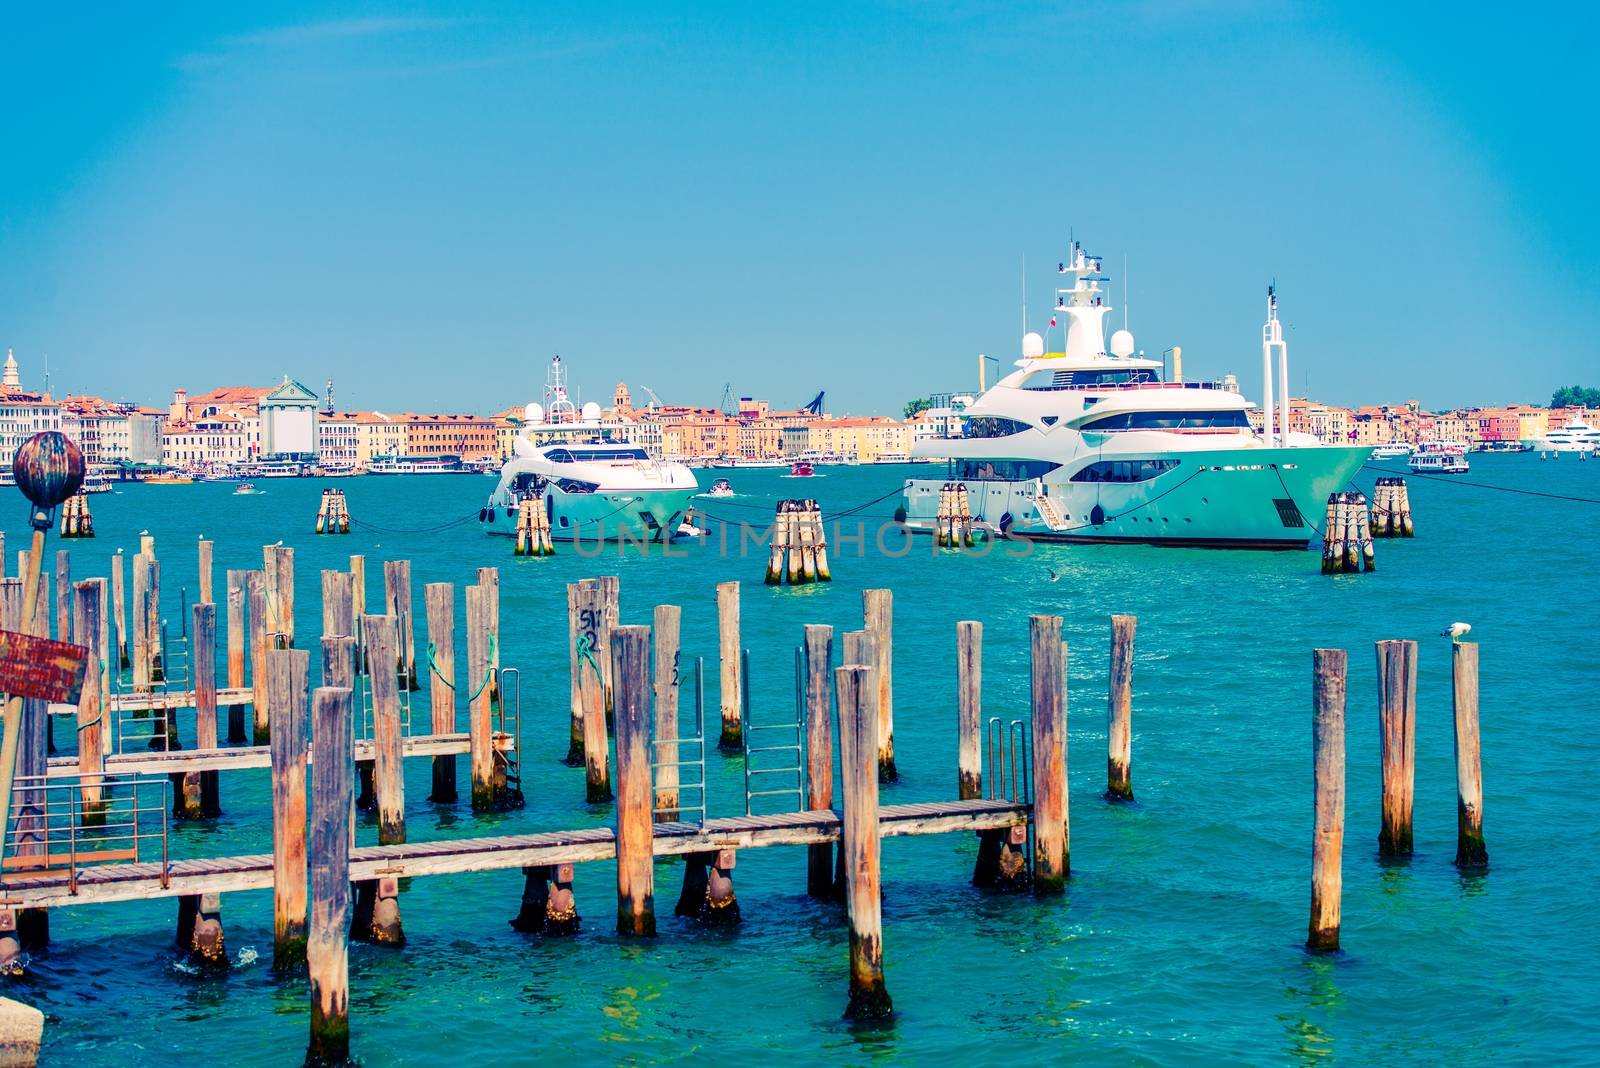 Yachts in Venice, Italy by welcomia